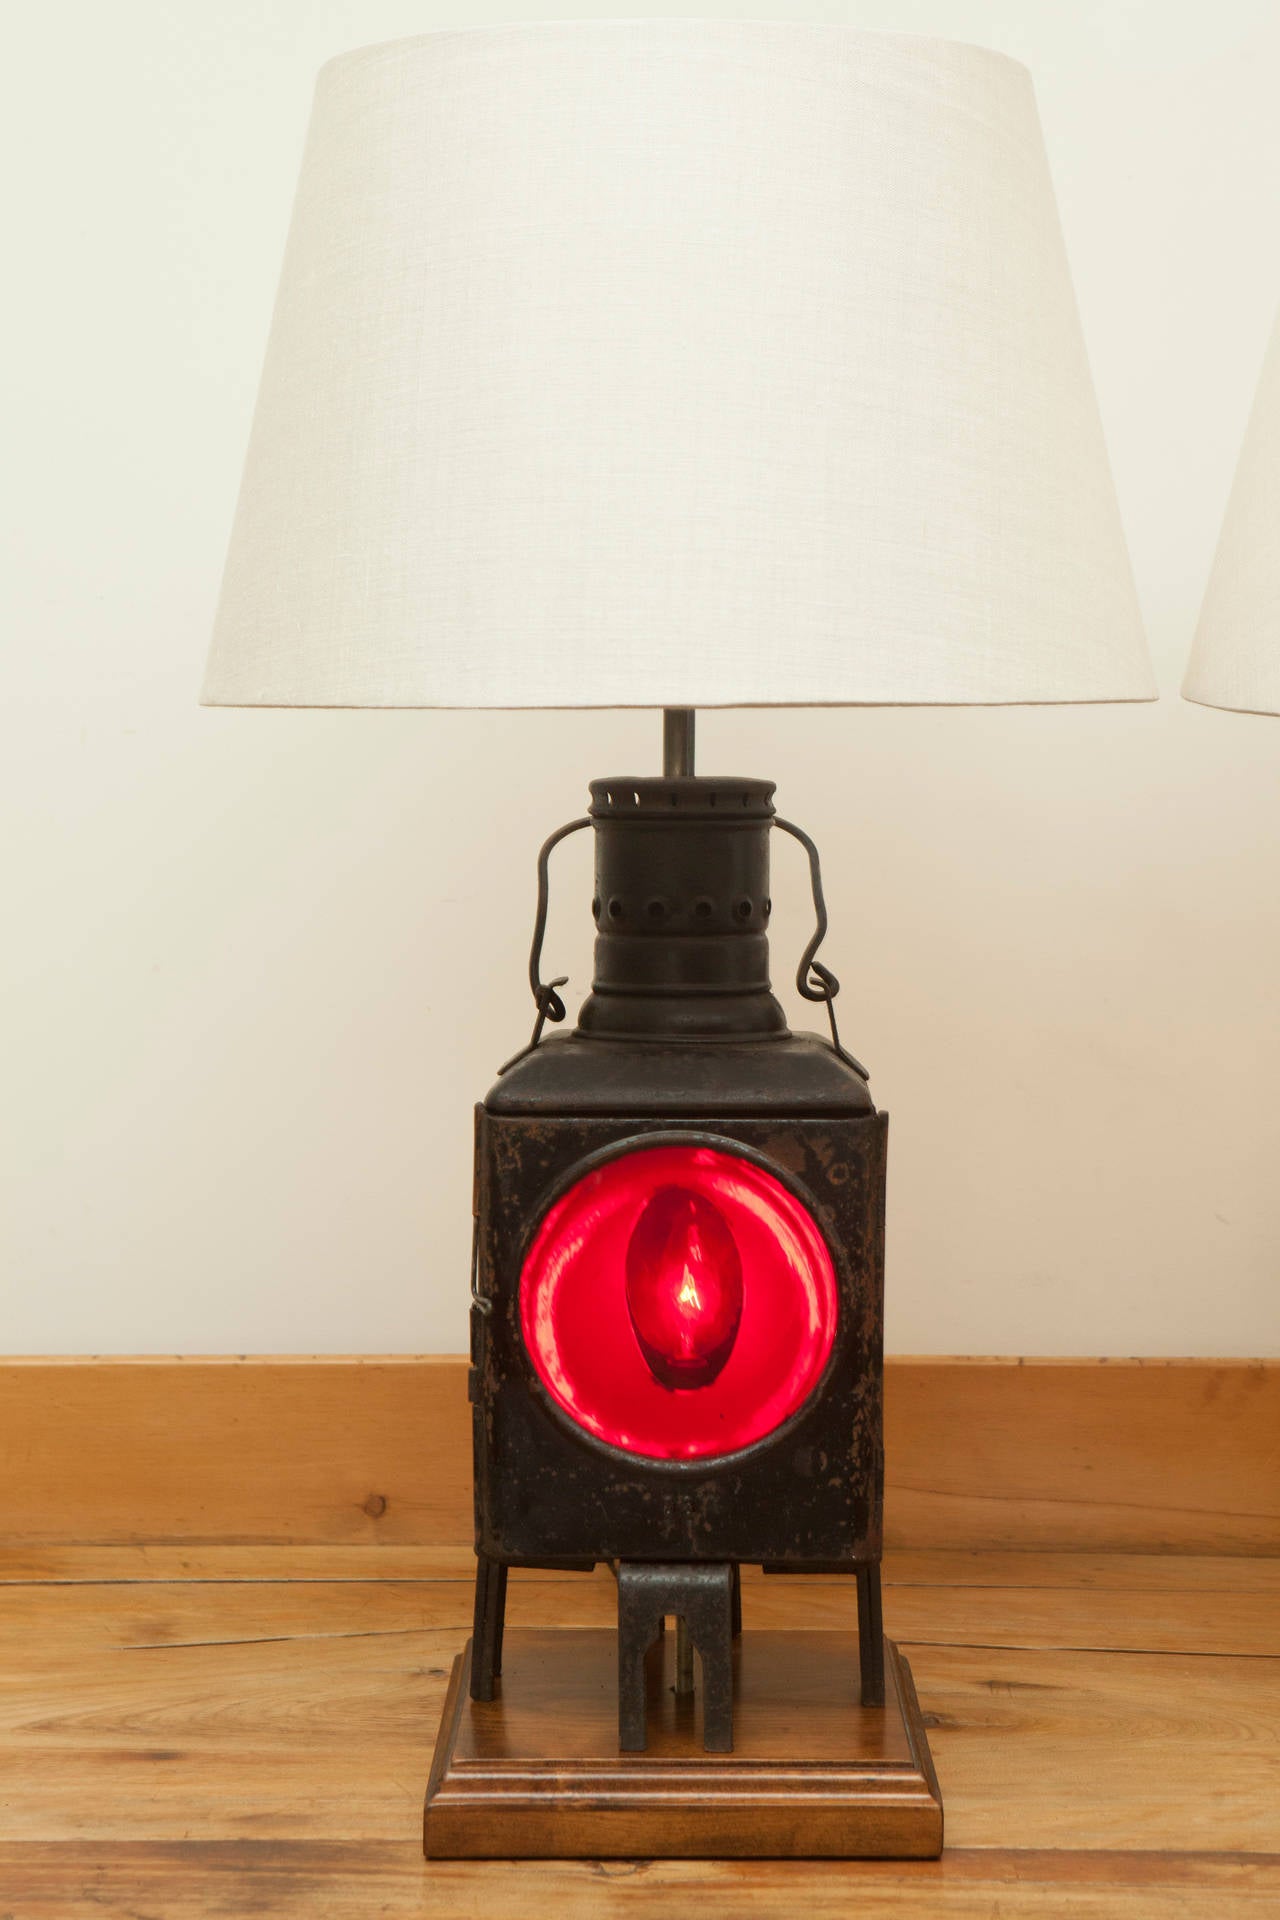 We had a pair of these lamps, but have sold one so we are offering the second on its own.  This signal train lantern was converted into an electric lamps with two light sources; the red lens light from the body of the lantern and the conventional